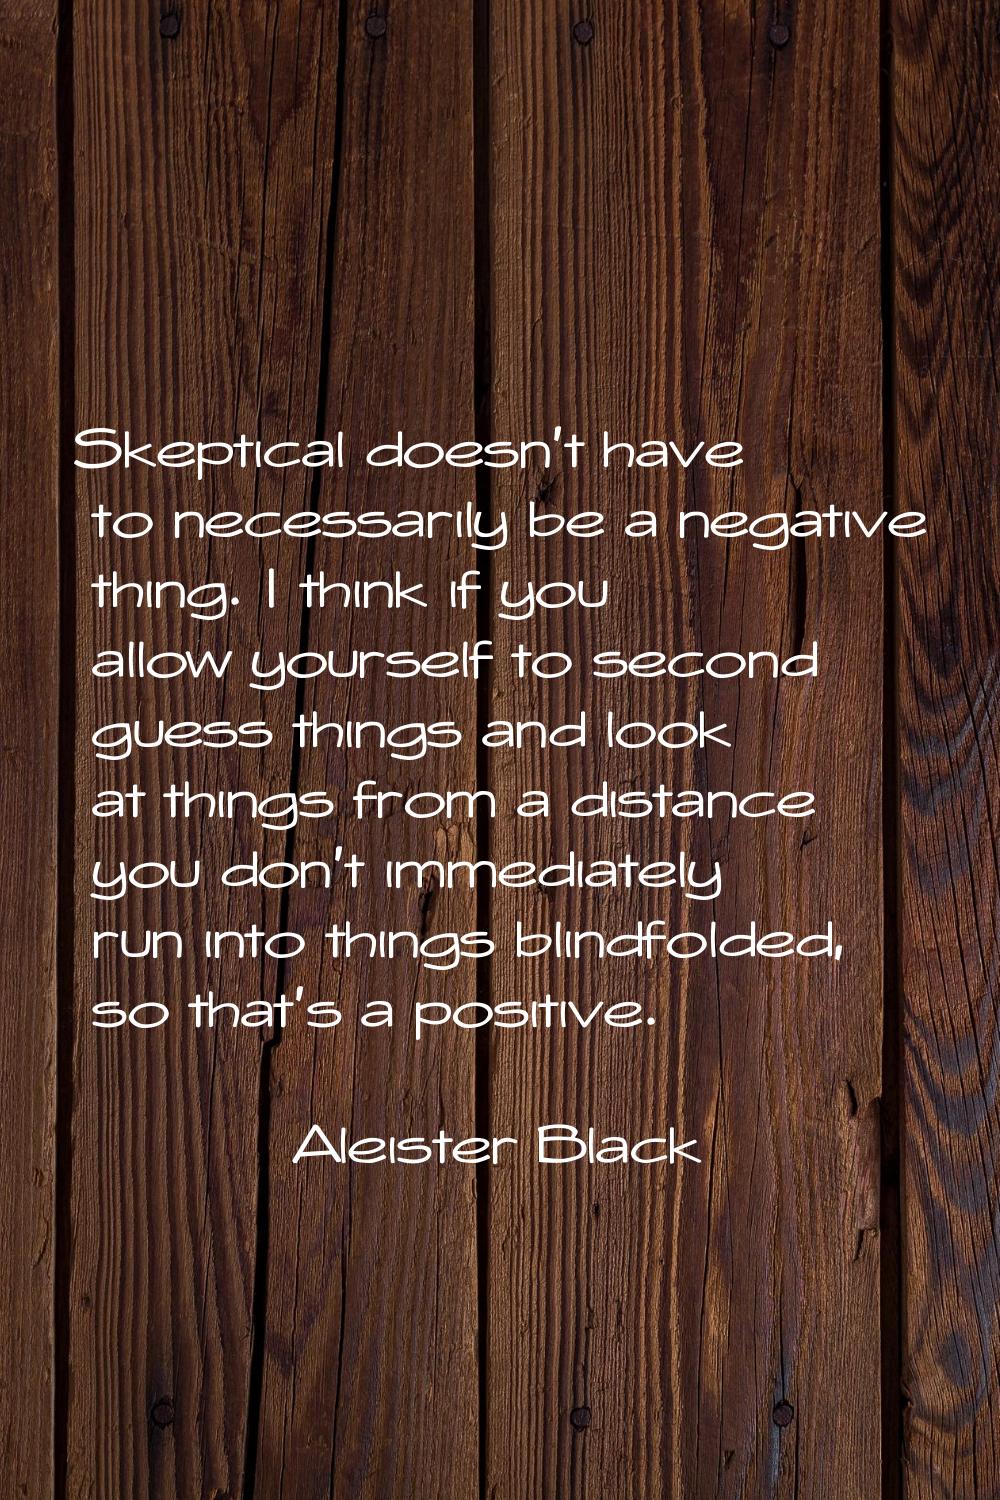 Skeptical doesn't have to necessarily be a negative thing. I think if you allow yourself to second 